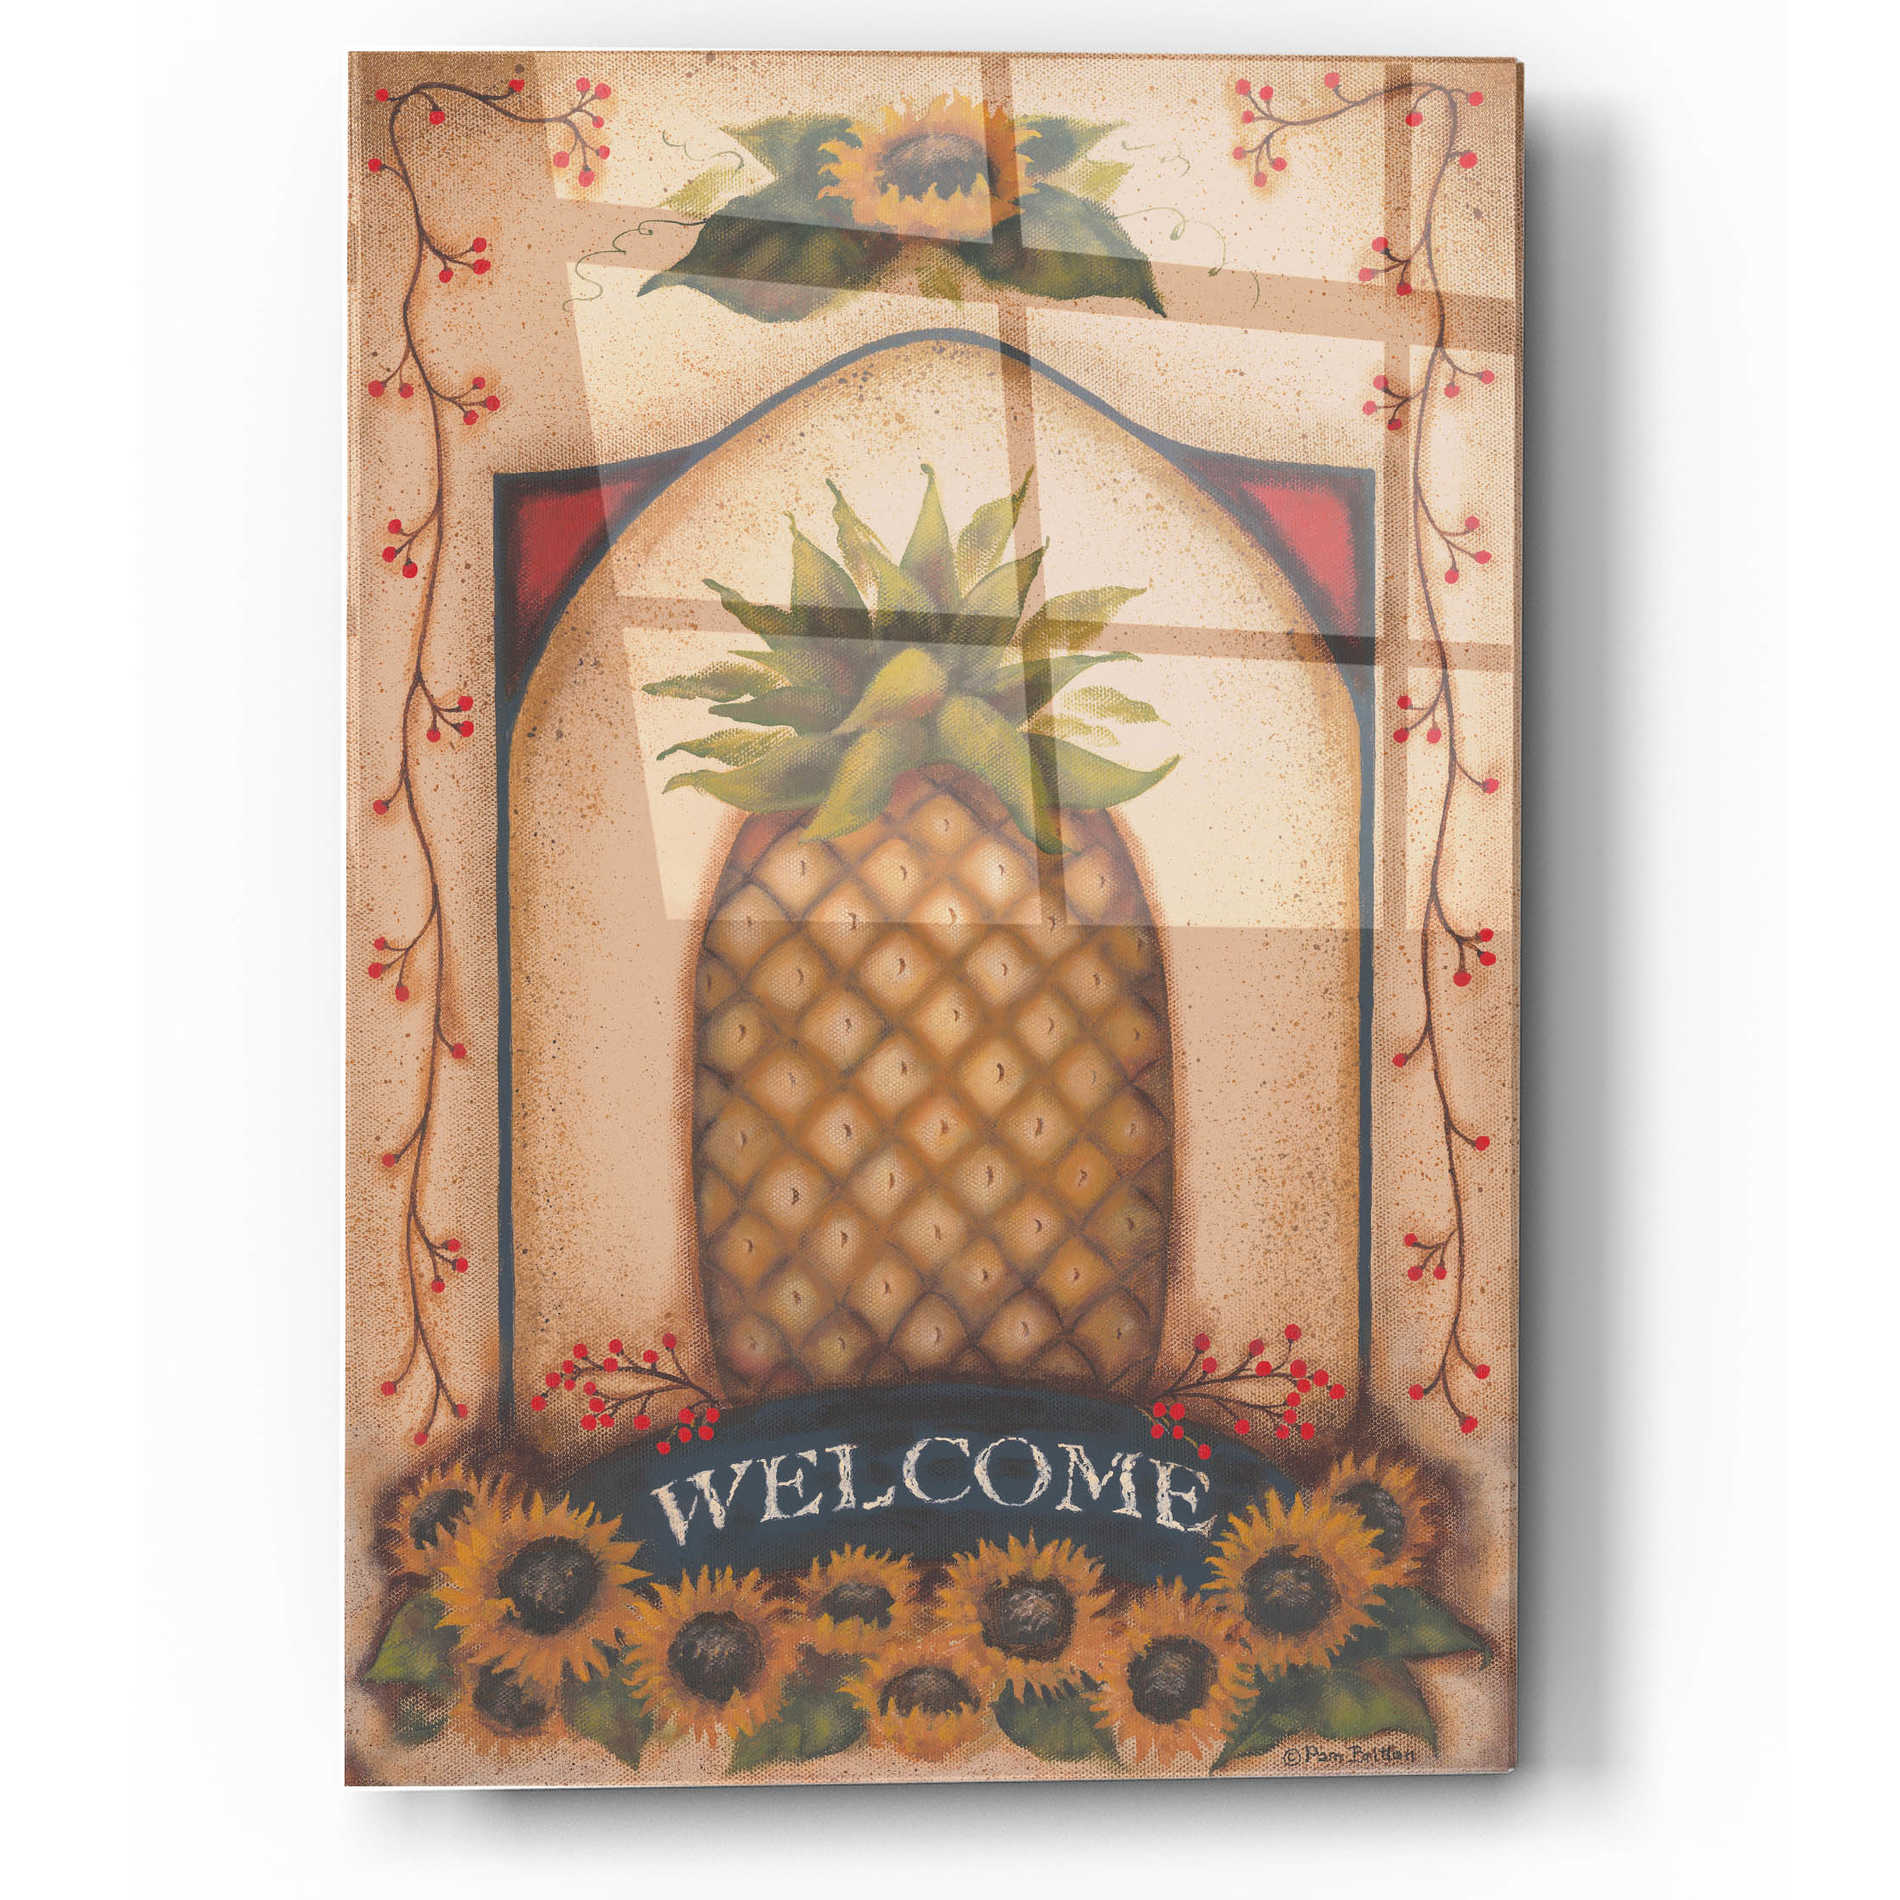 Epic Art 'Welcome Pineapple & Sunflowers' by Pam Britton, Acrylic Glass Wall Art,12x16